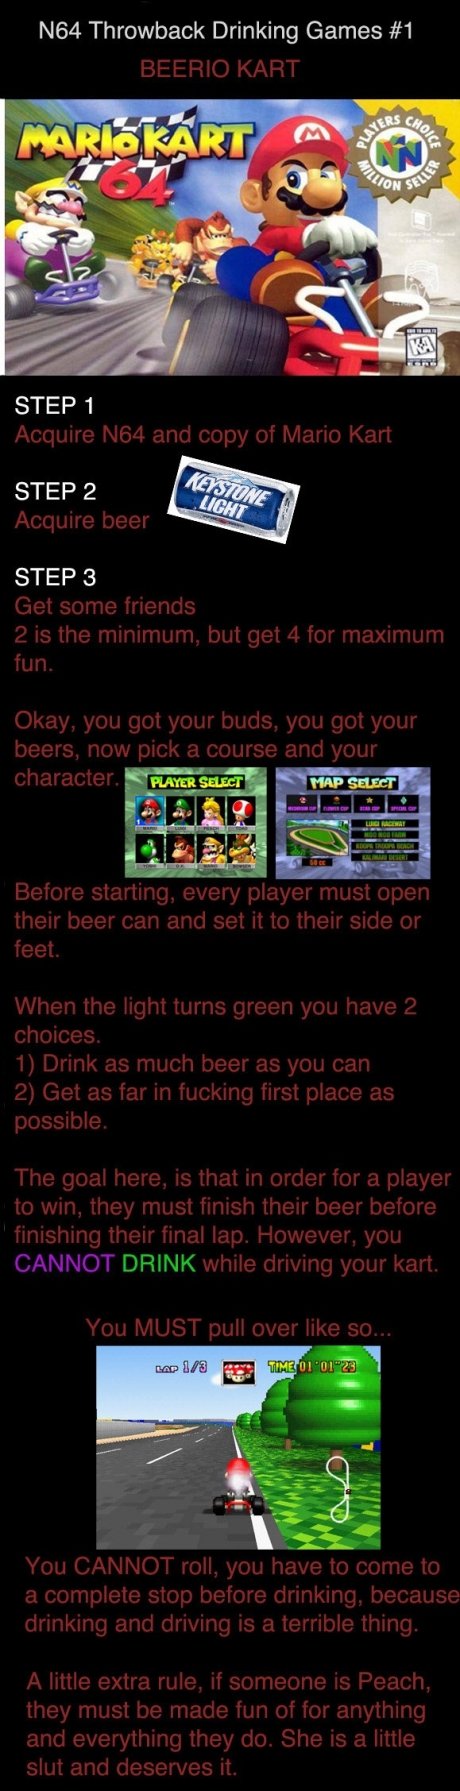 mario kart 64 drinking game - N64 Throwback Drinking Games Beerio Kart Mariokart M Ton Se Seller Step 1 Acquire N64 and copy of Mario Kart Step 2 Messione Acquire beer Kentum Light Step 3 Get some friends 2 is the minimum, but get 4 for maximum fun. Okay,